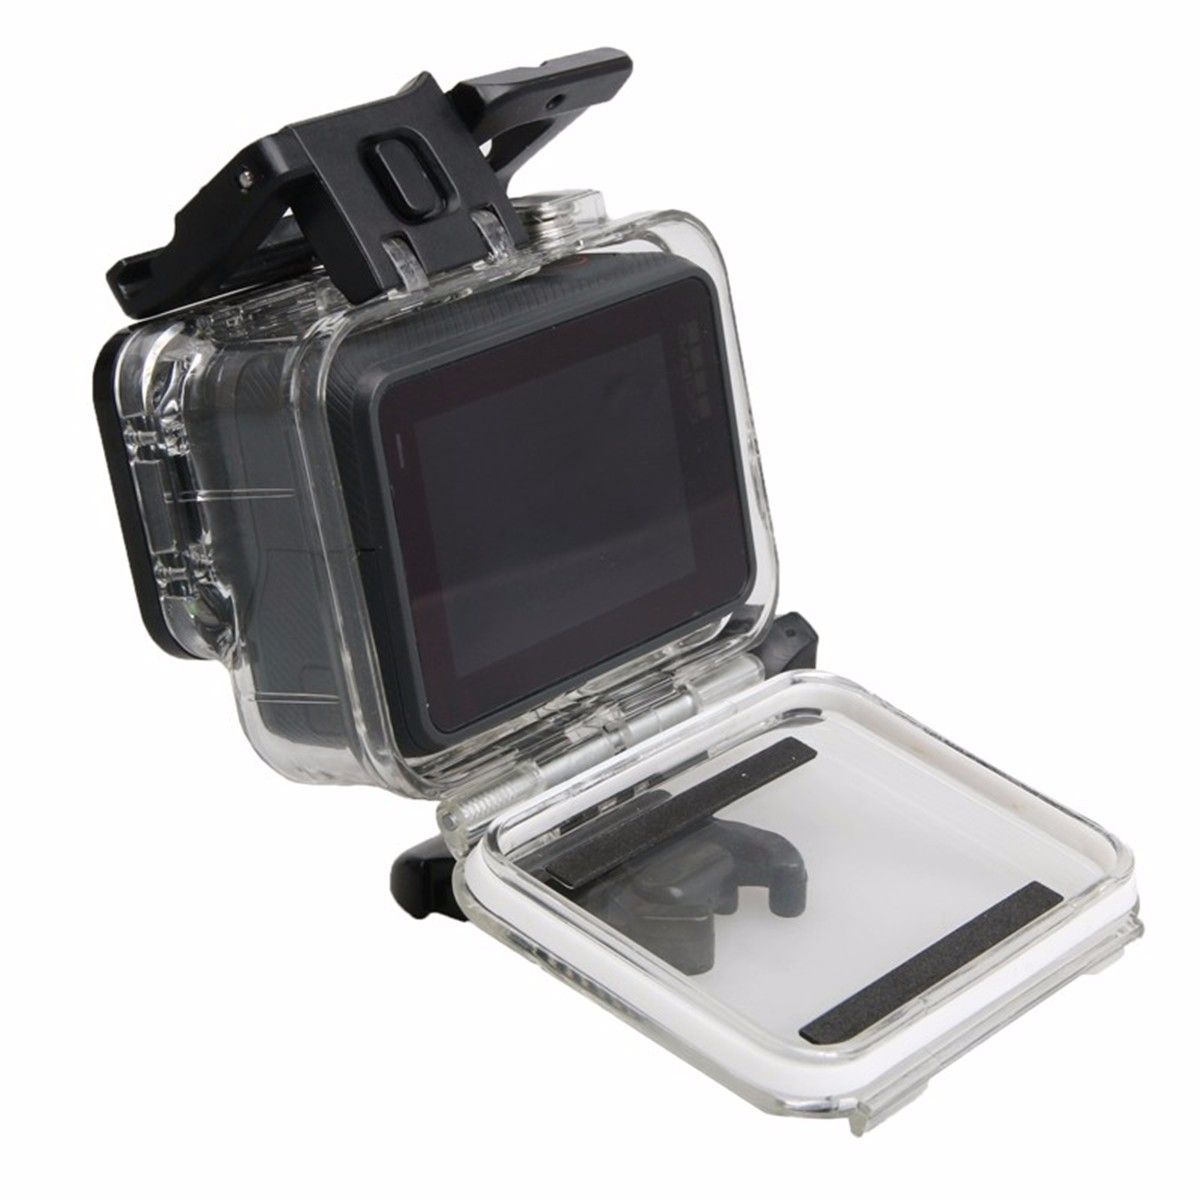 60M-Waterproof-Housing-Case-with-Tough-Screenn-Back-Door-Cover-For-Gopro-Hero-5-Black-1112421